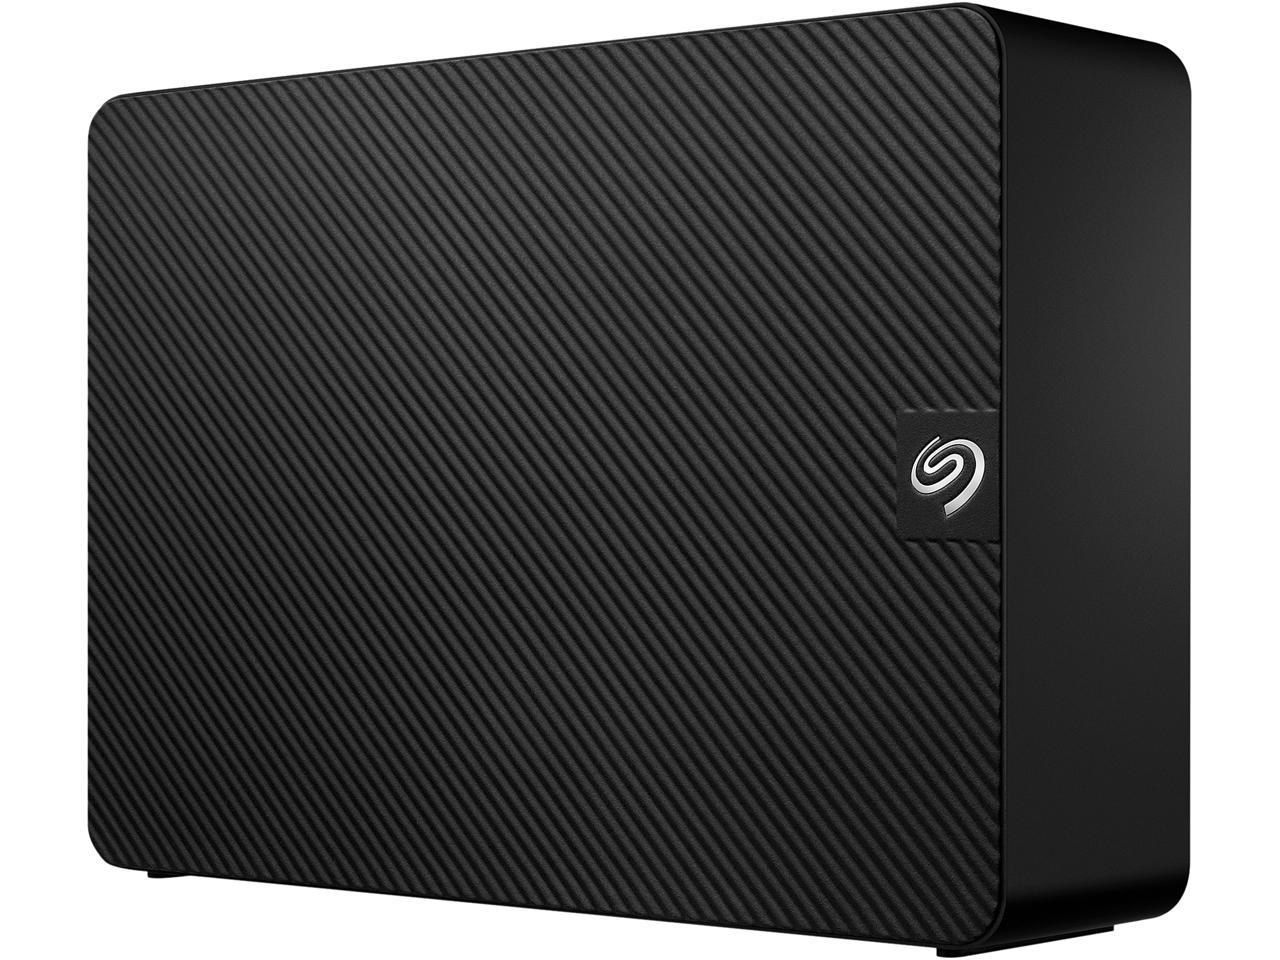 16TB Seagate Expansion External Hard Drive with Rescue Data Recovery Services $250